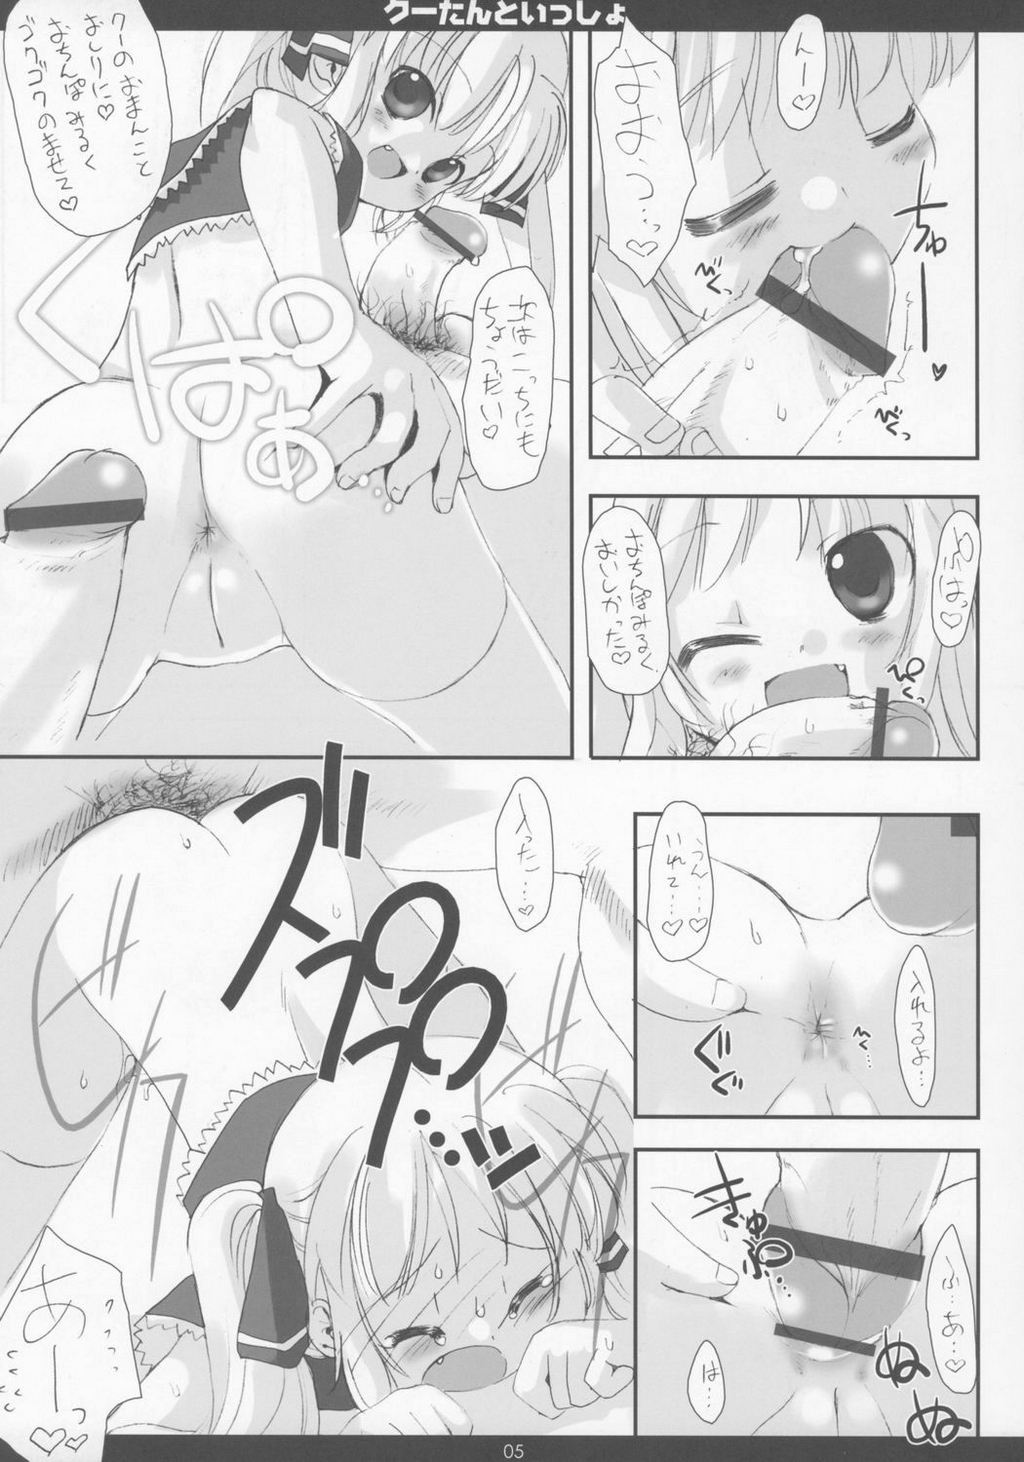 (C71)[Chokudoukan] SPERMA ANGELS page 6 full